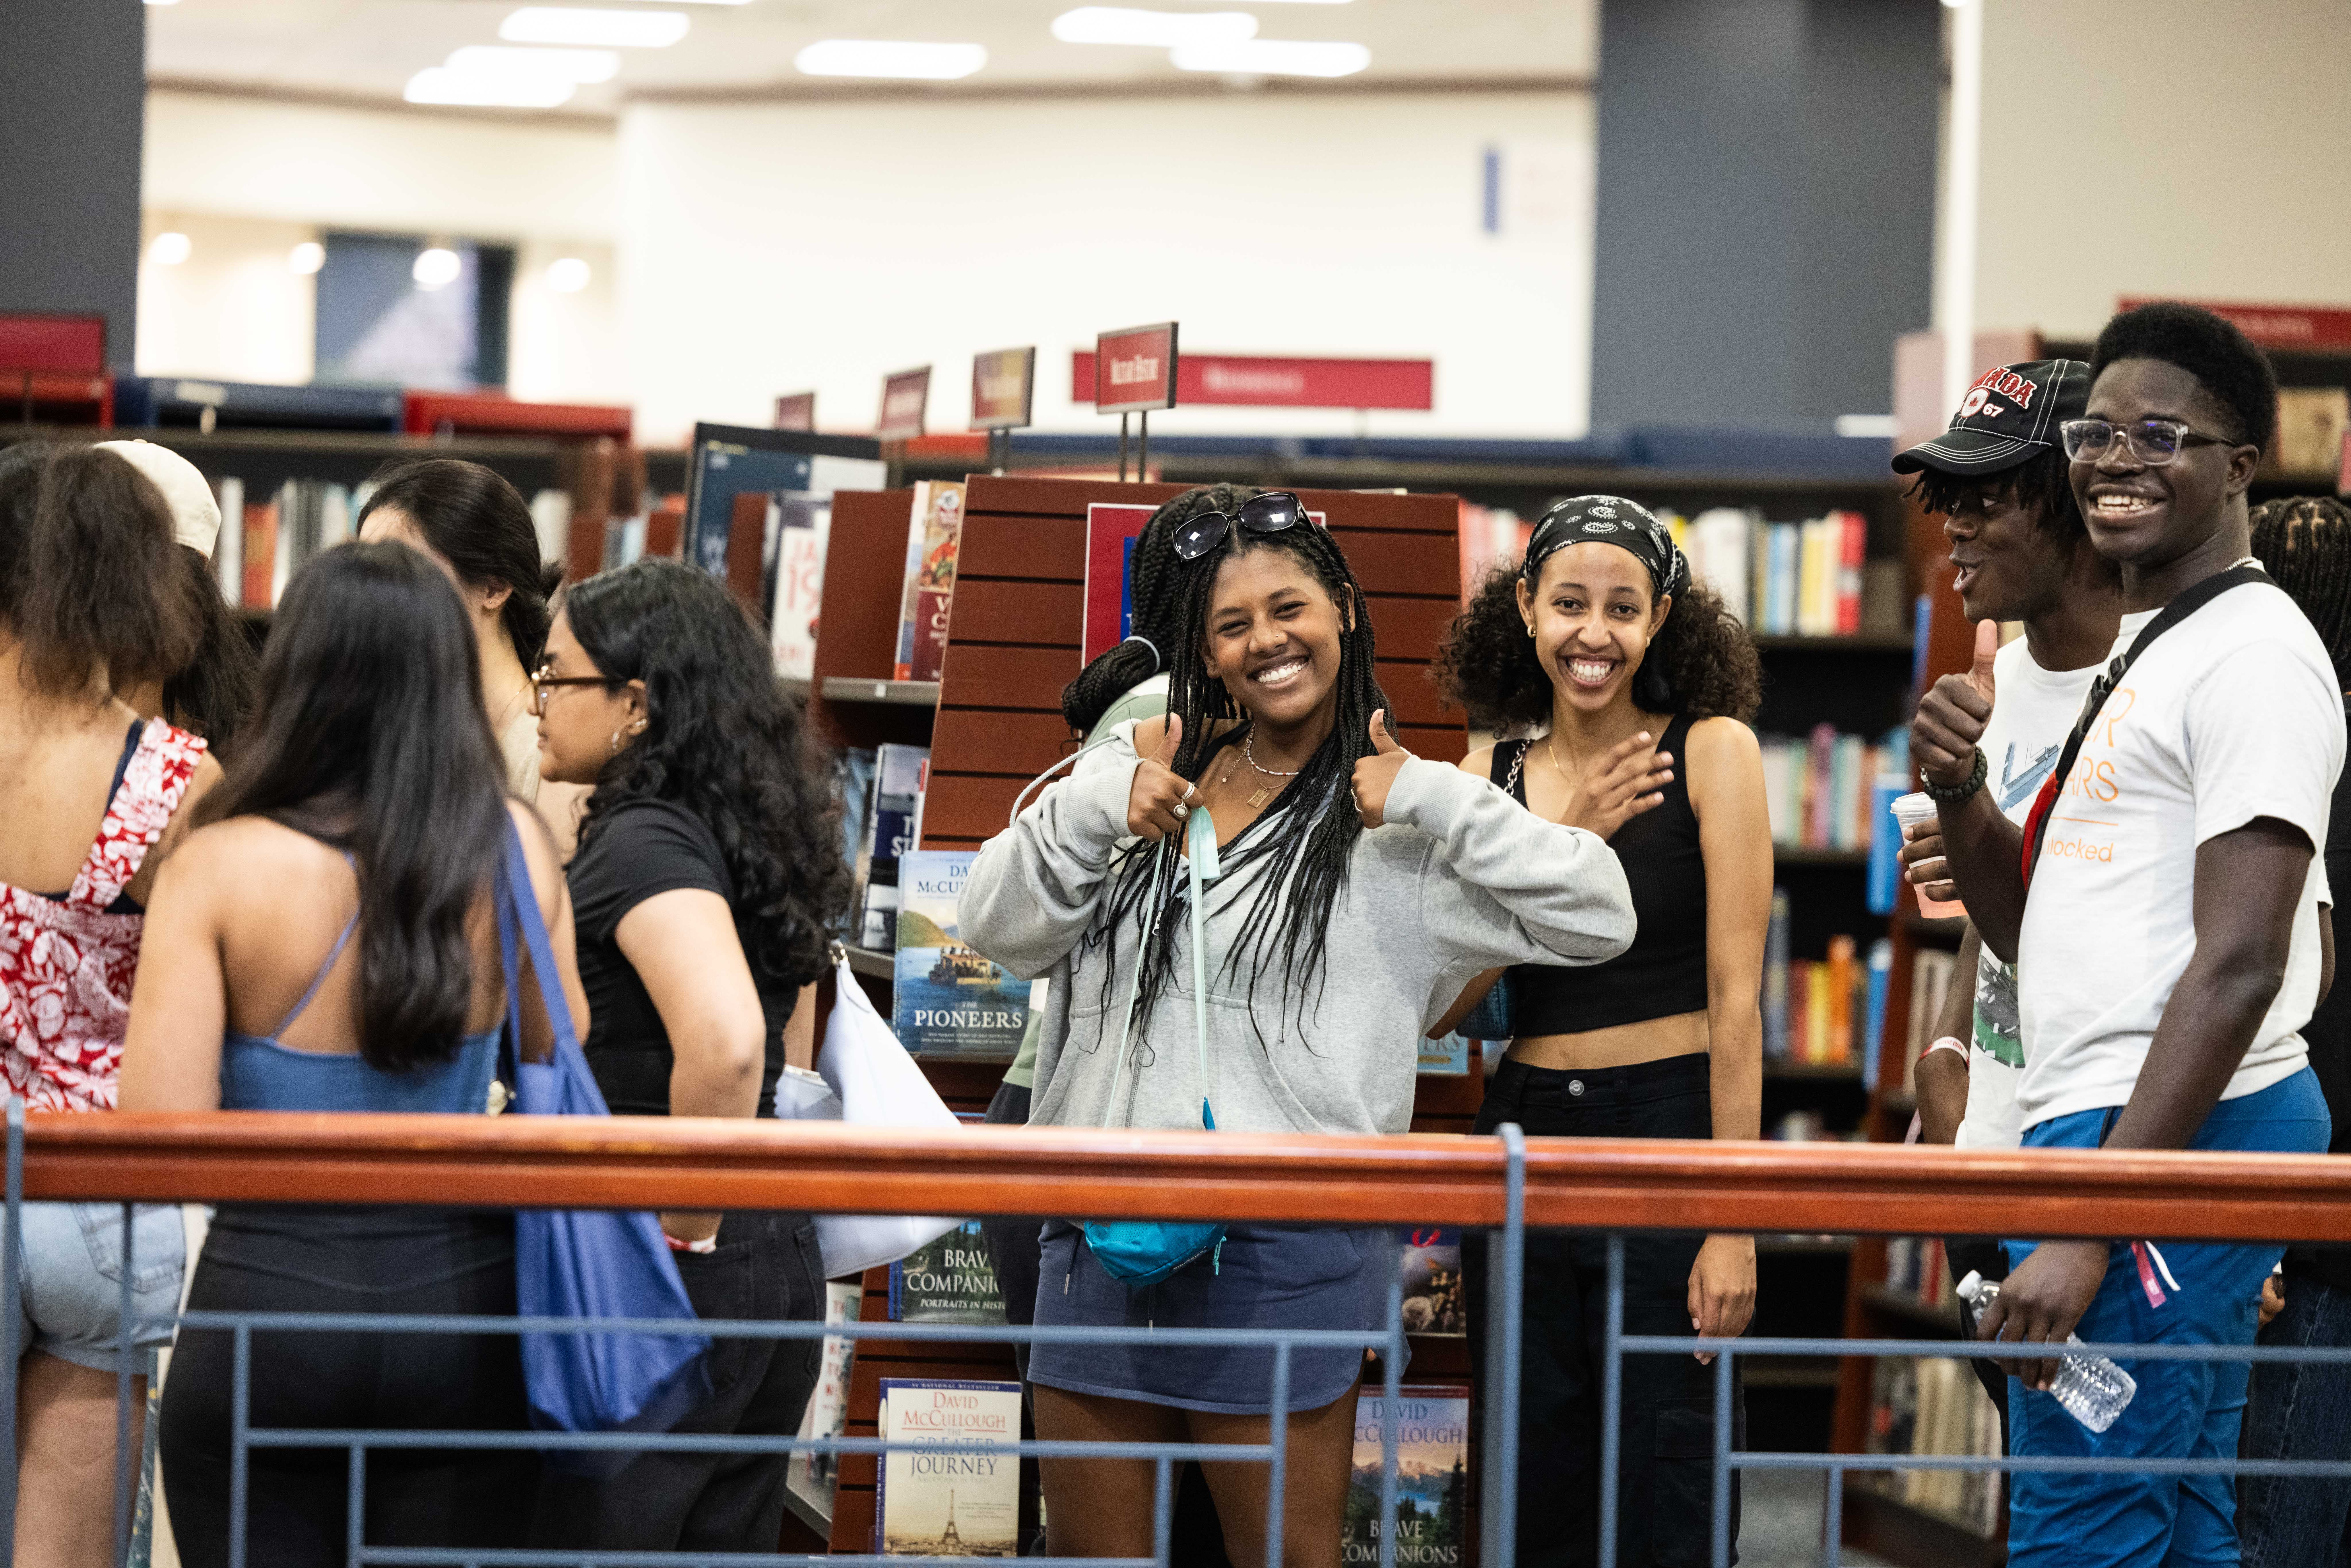 Students smile and give a thumbs up while waiting in line at the bookstore